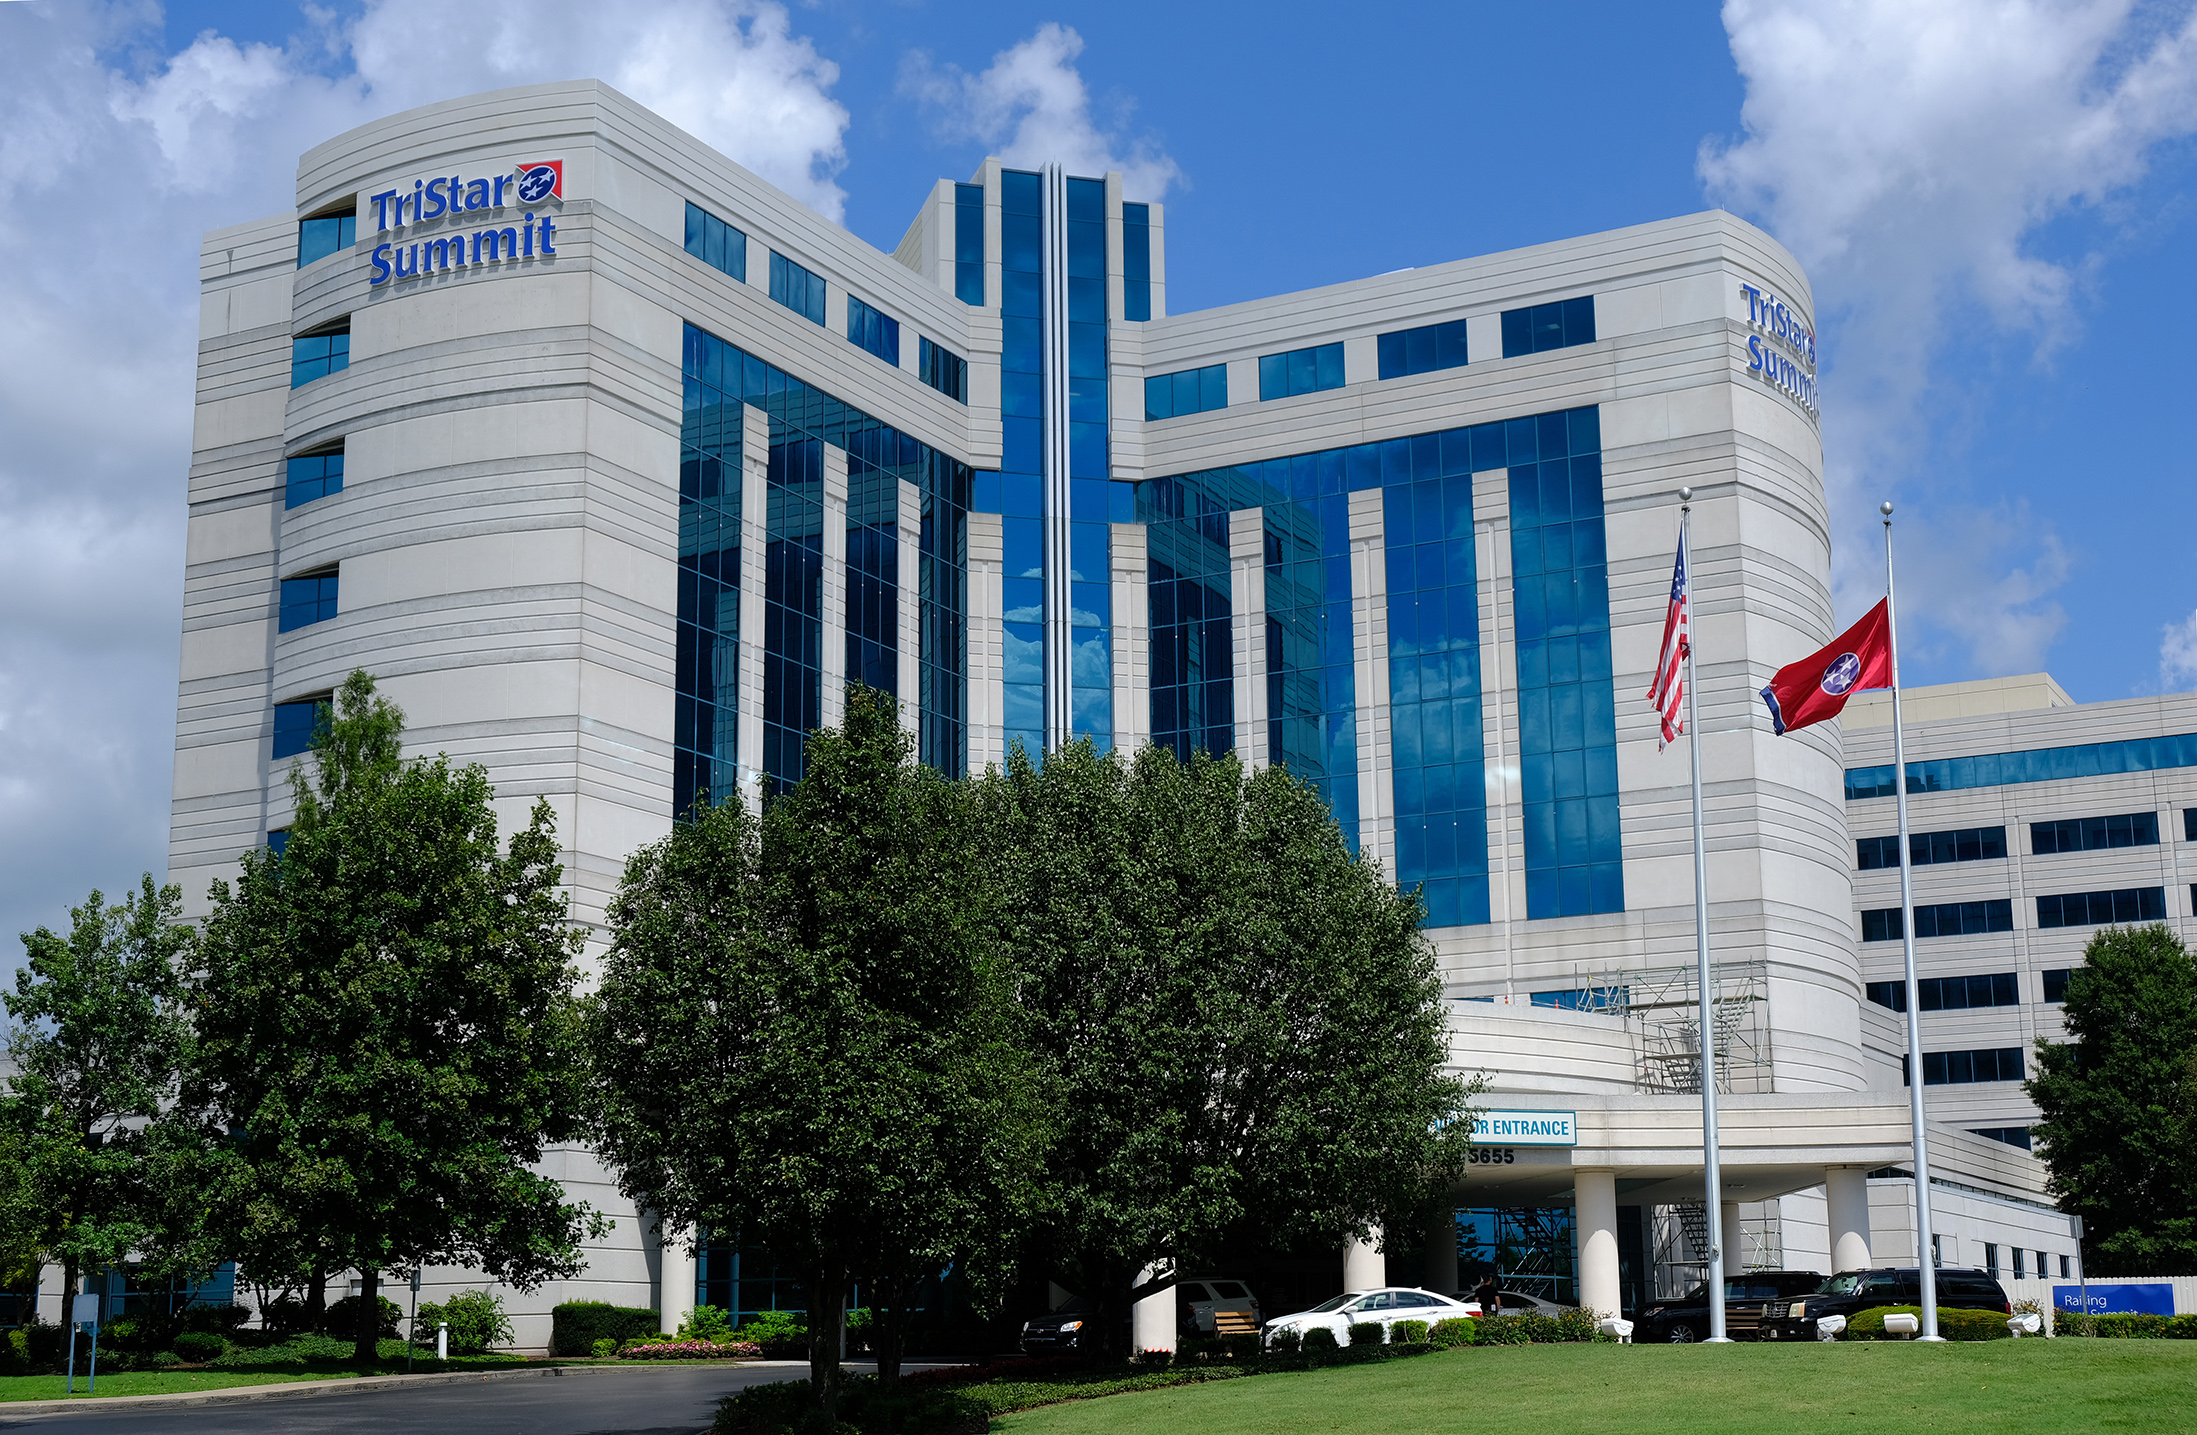 Tristar Summit Medical Center as seen from the street. An American and Tennessee State flags on flagpoles, stout trees, and a roofed parkway at the entrance.